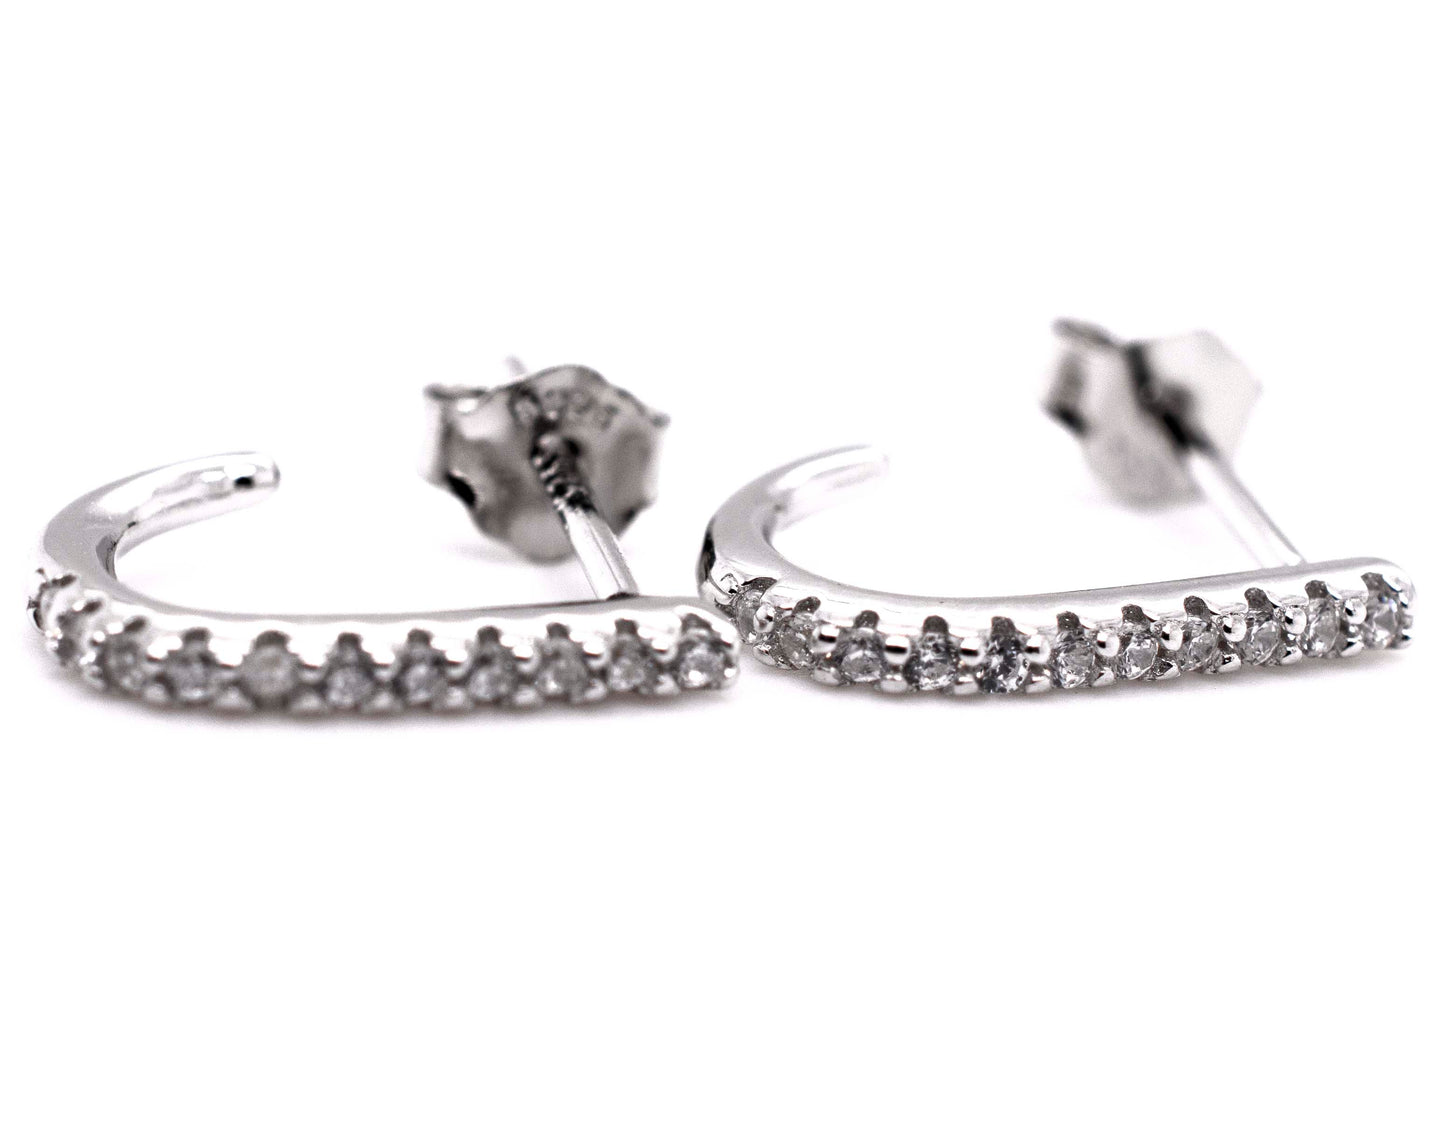 A pair of Super Silver Tiny Pave Cubic Zirconia Half Hoop Post Earrings with diamond-alternative stones.